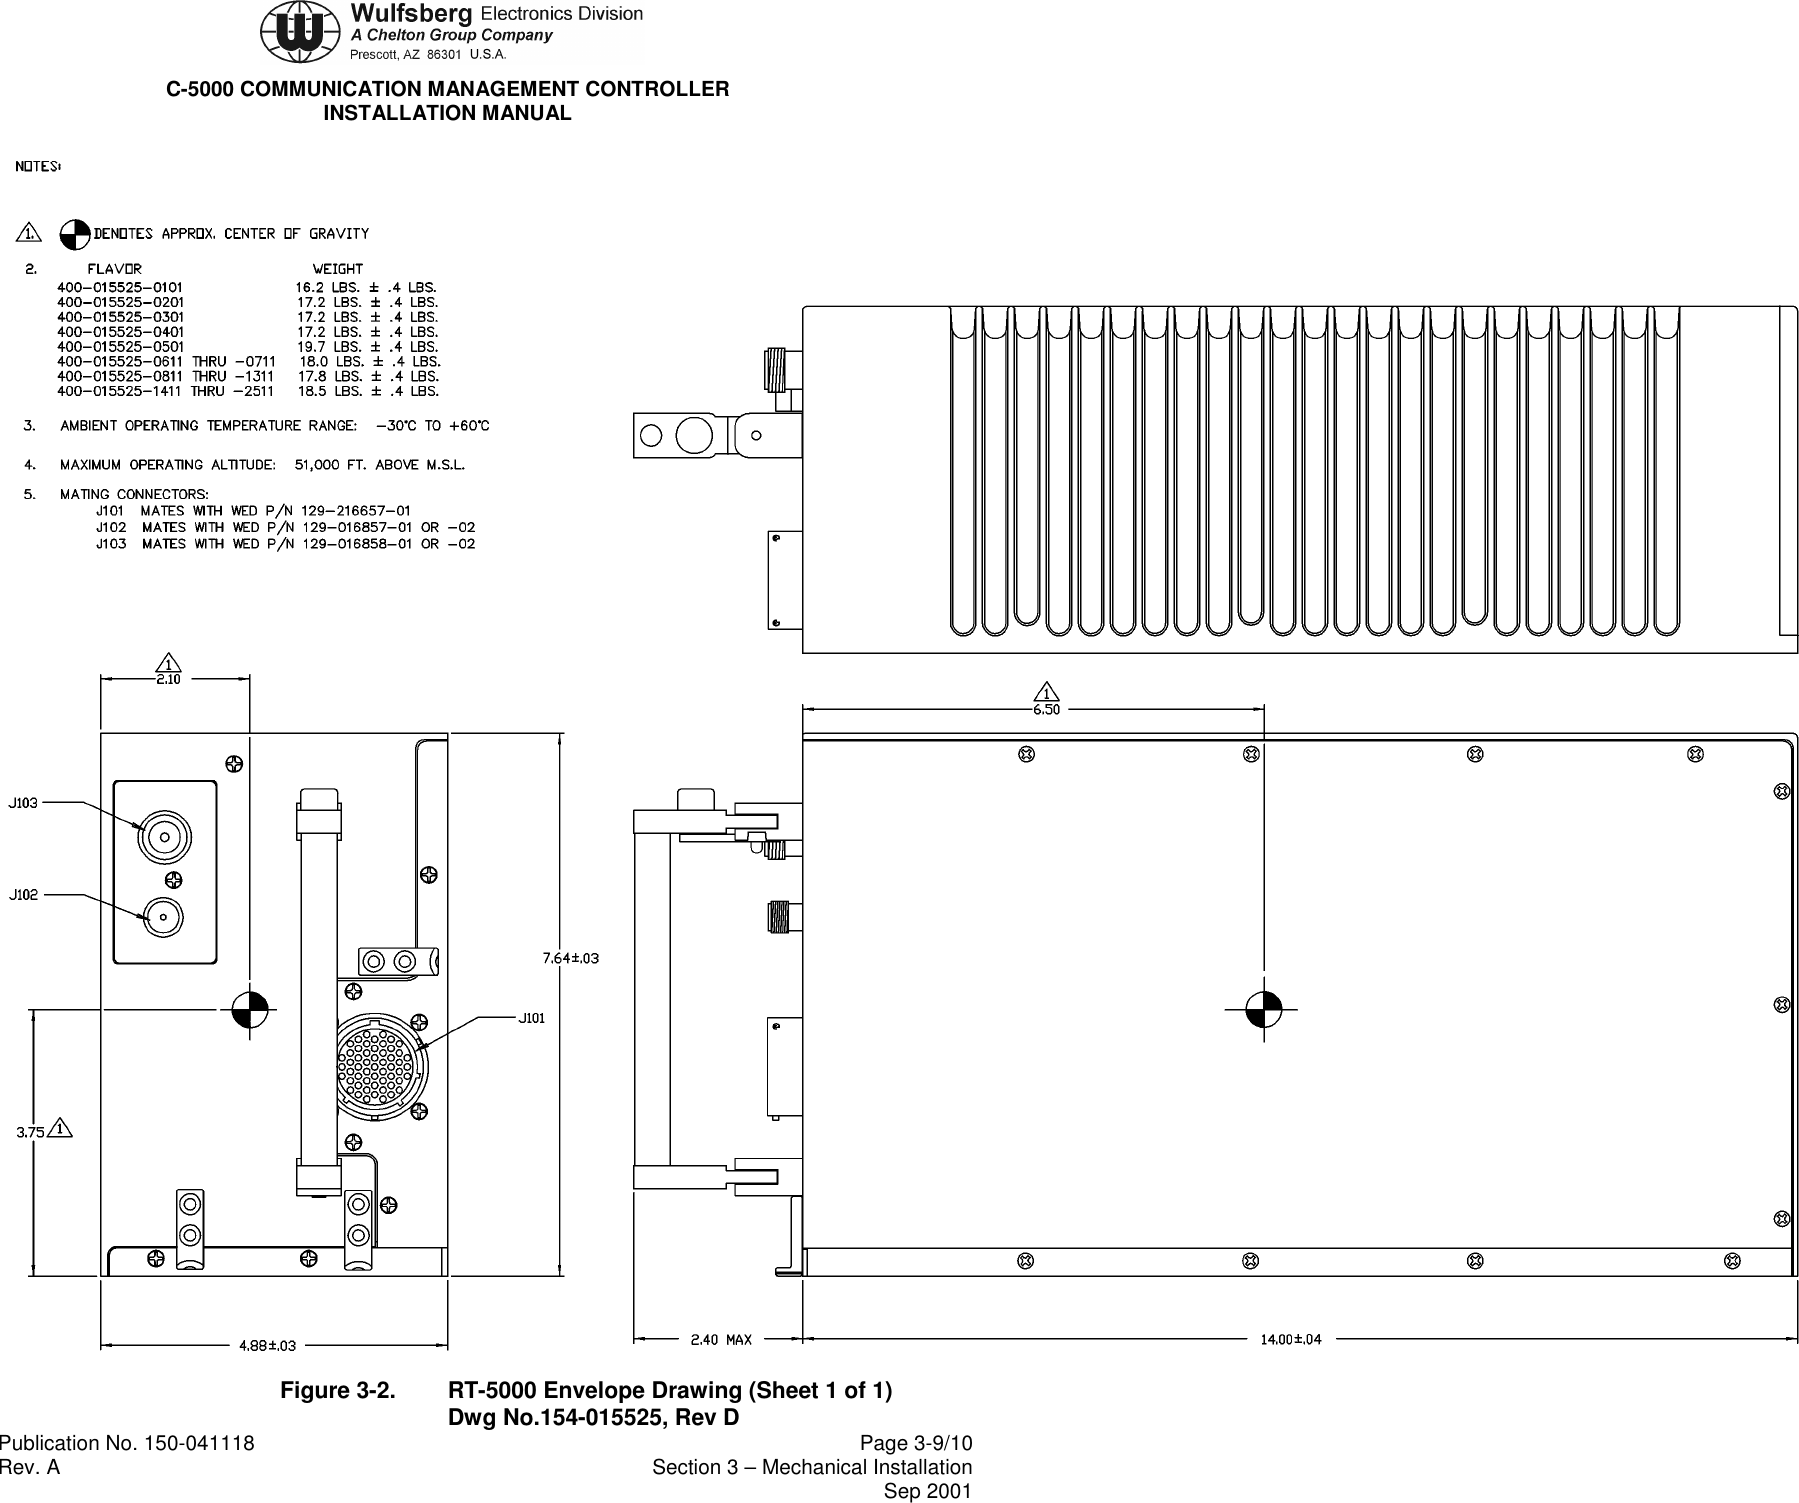 C-5000 COMMUNICATION MANAGEMENT CONTROLLERINSTALLATION MANUALPublication No. 150-041118 Page 3-9/10Rev. A Section 3 – Mechanical InstallationSep 2001Figure 3-2. RT-5000 Envelope Drawing (Sheet 1 of 1)Dwg No.154-015525, Rev D